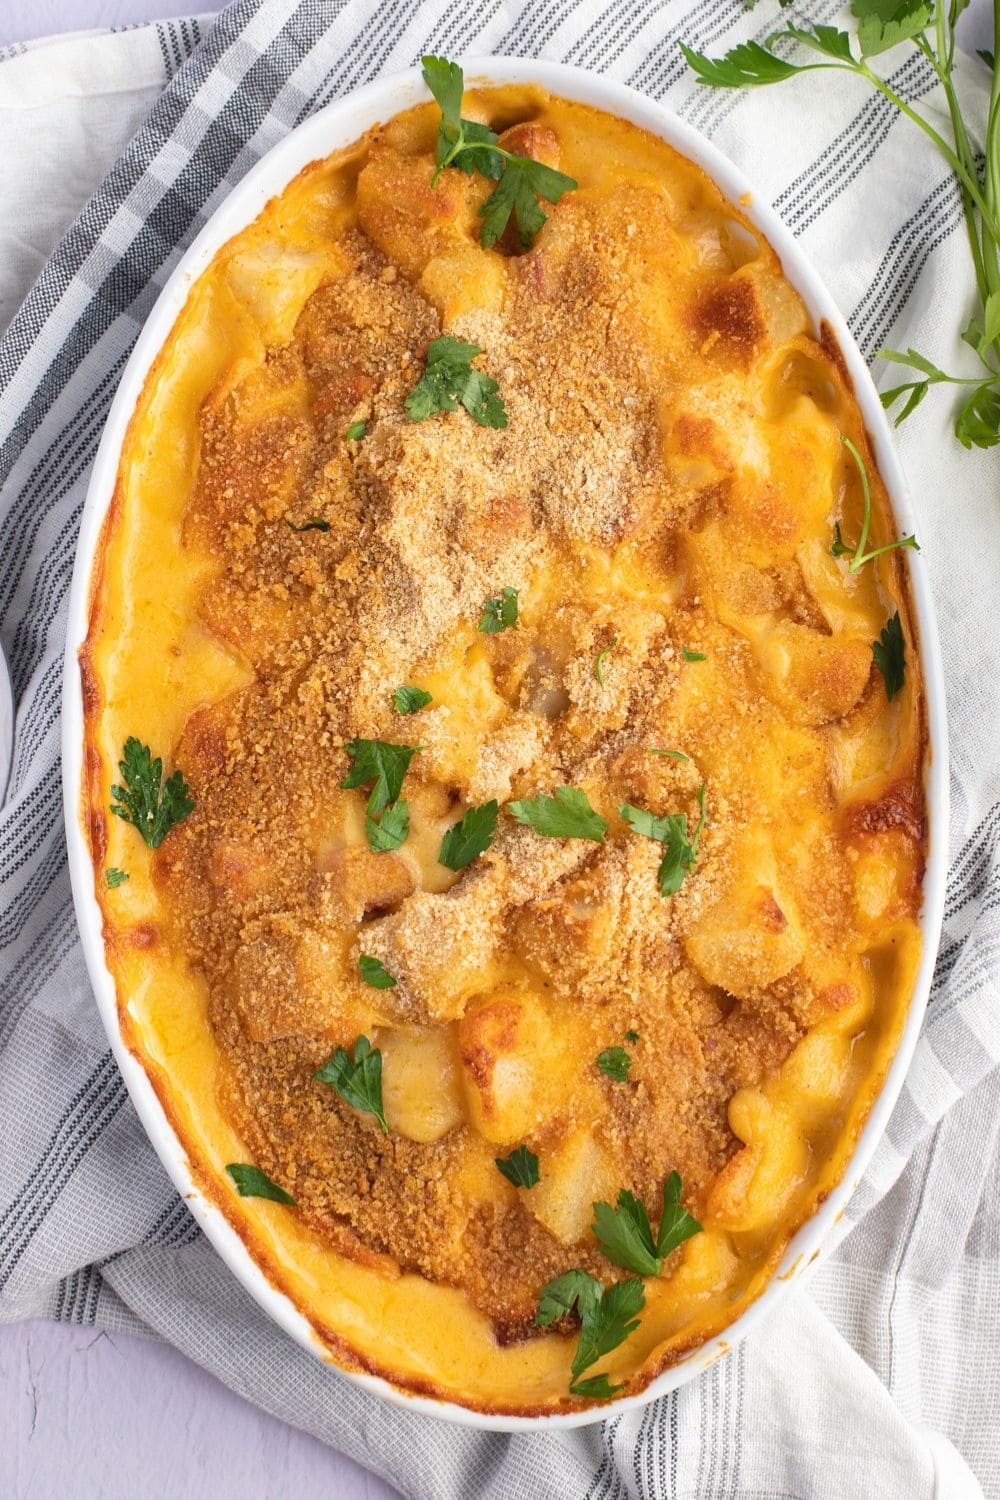 Hearty and Creamy Ham and Potato Casserole in an Oval Casserole Dish on a Plaid Table Cloth